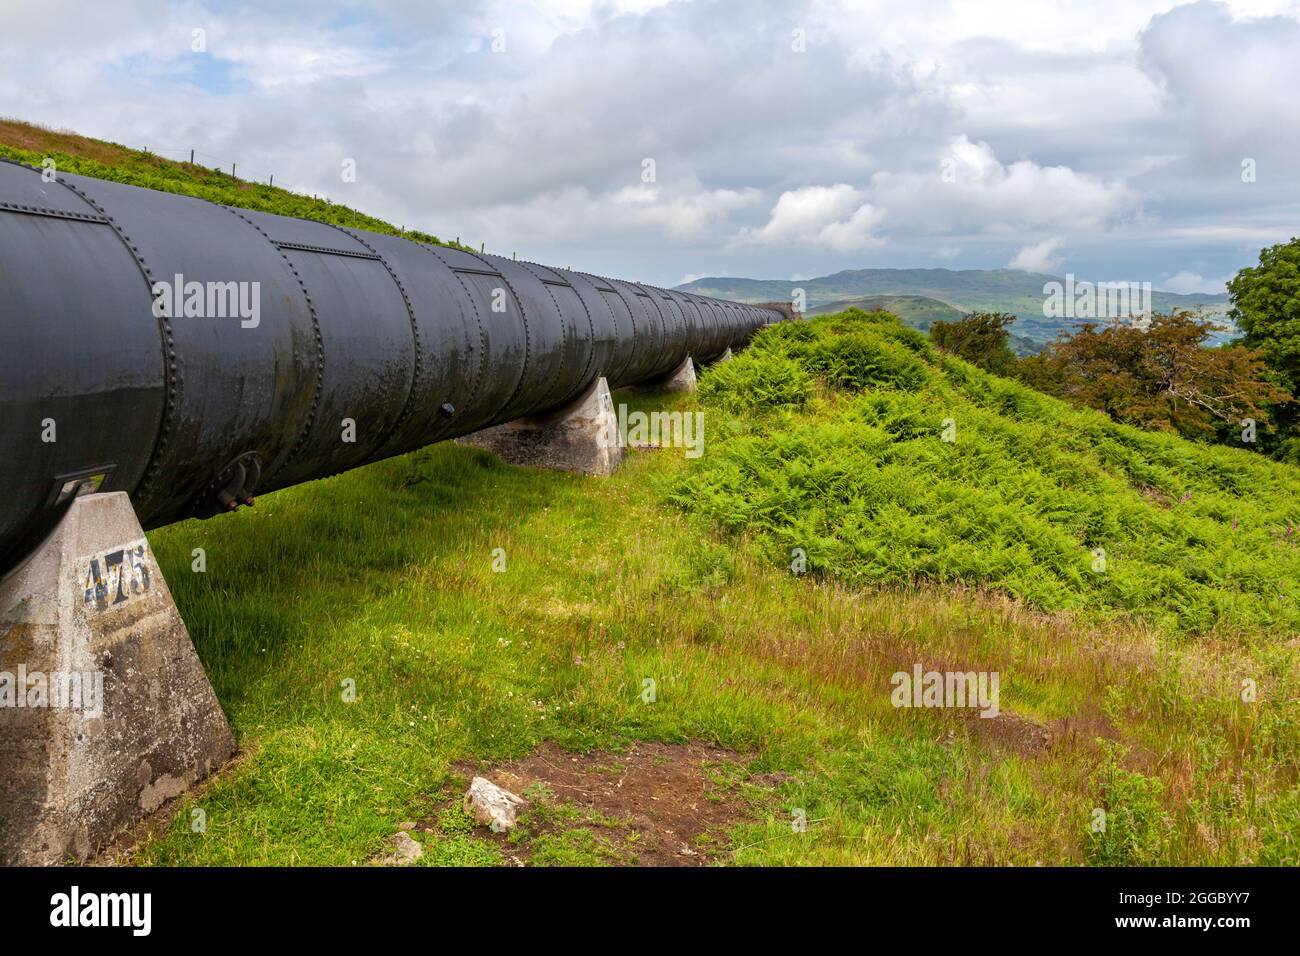 One of the pipes carrying water to the Hydro electric power station at Dolgarrog, Snowdonia Natinal Park Stock Photo